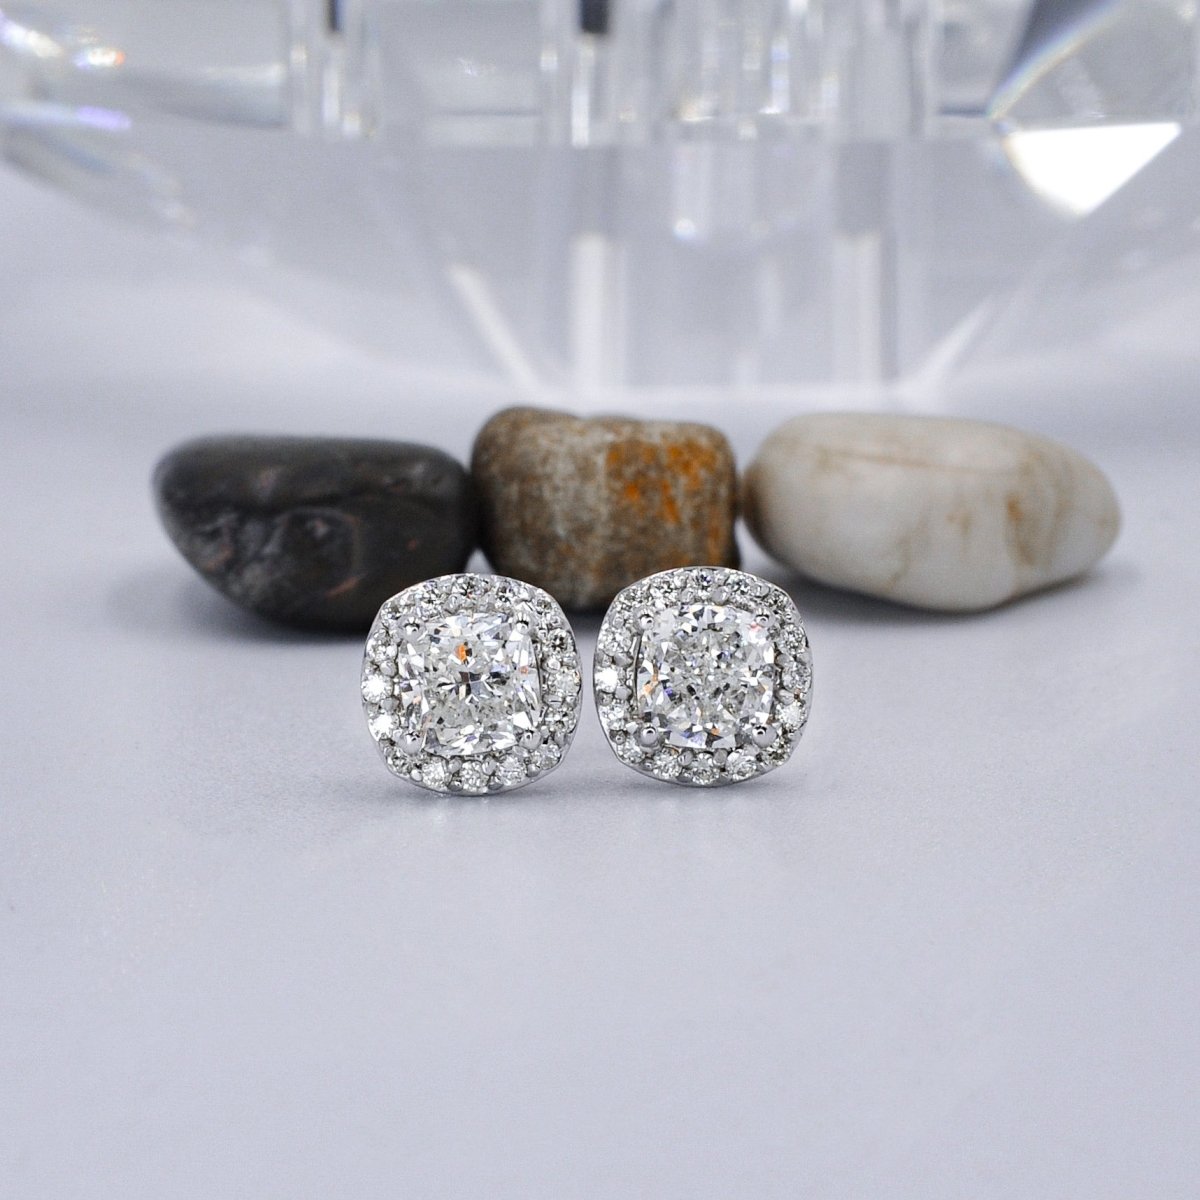 Exquisite 2.10CT Round and Cushion Cut Diamond Stud Earrings in Platinum - Primestyle.com